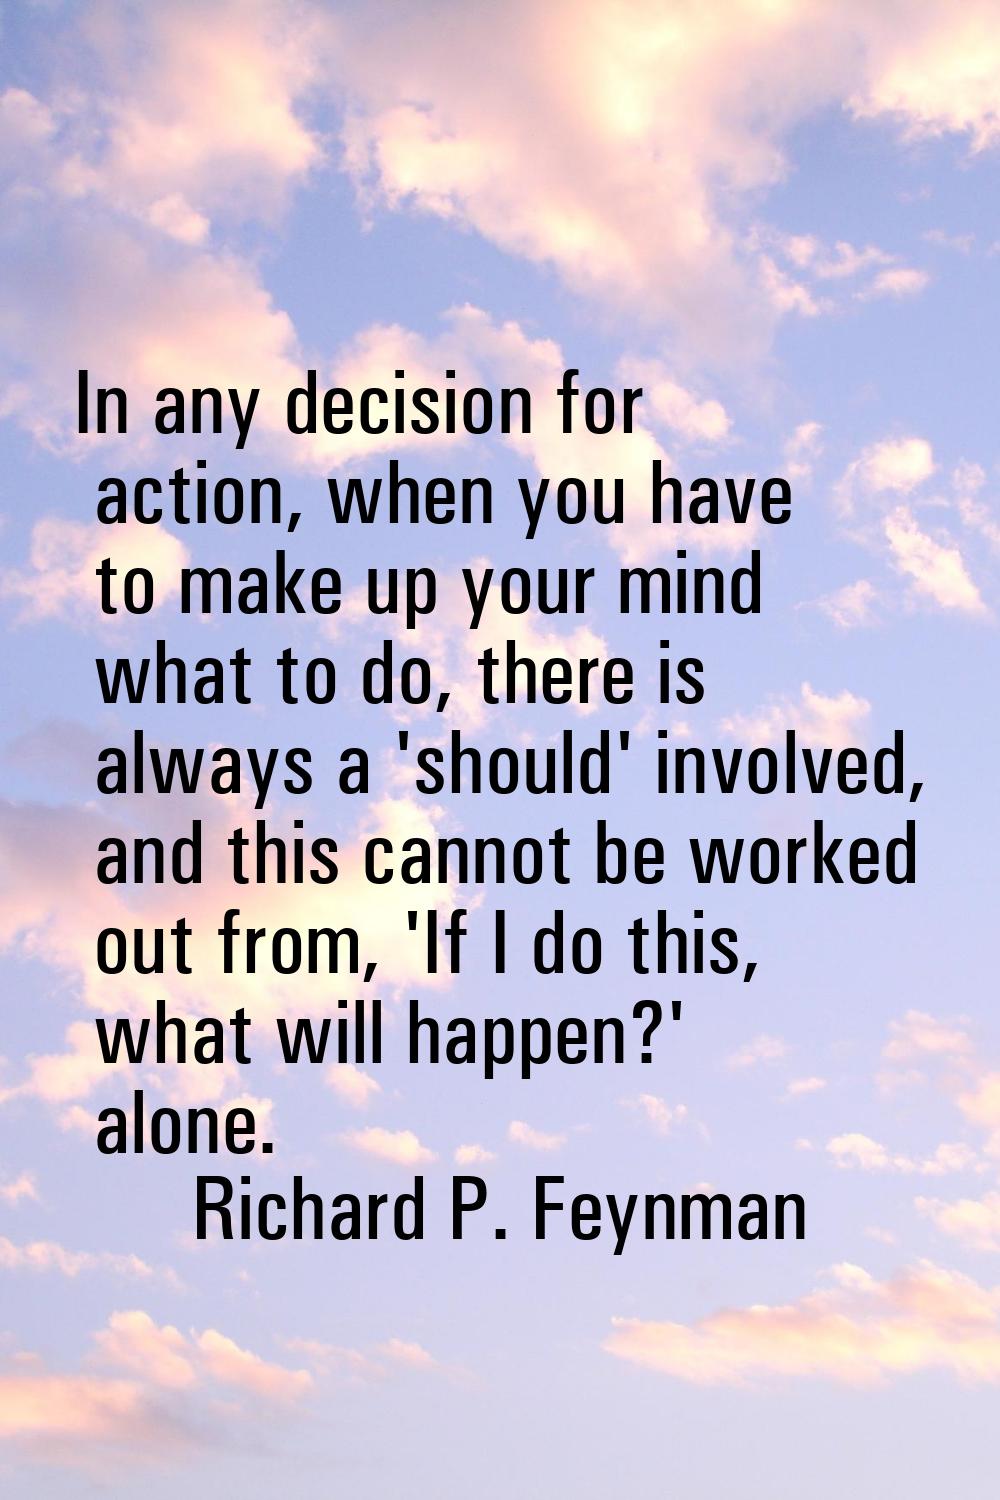 In any decision for action, when you have to make up your mind what to do, there is always a 'shoul